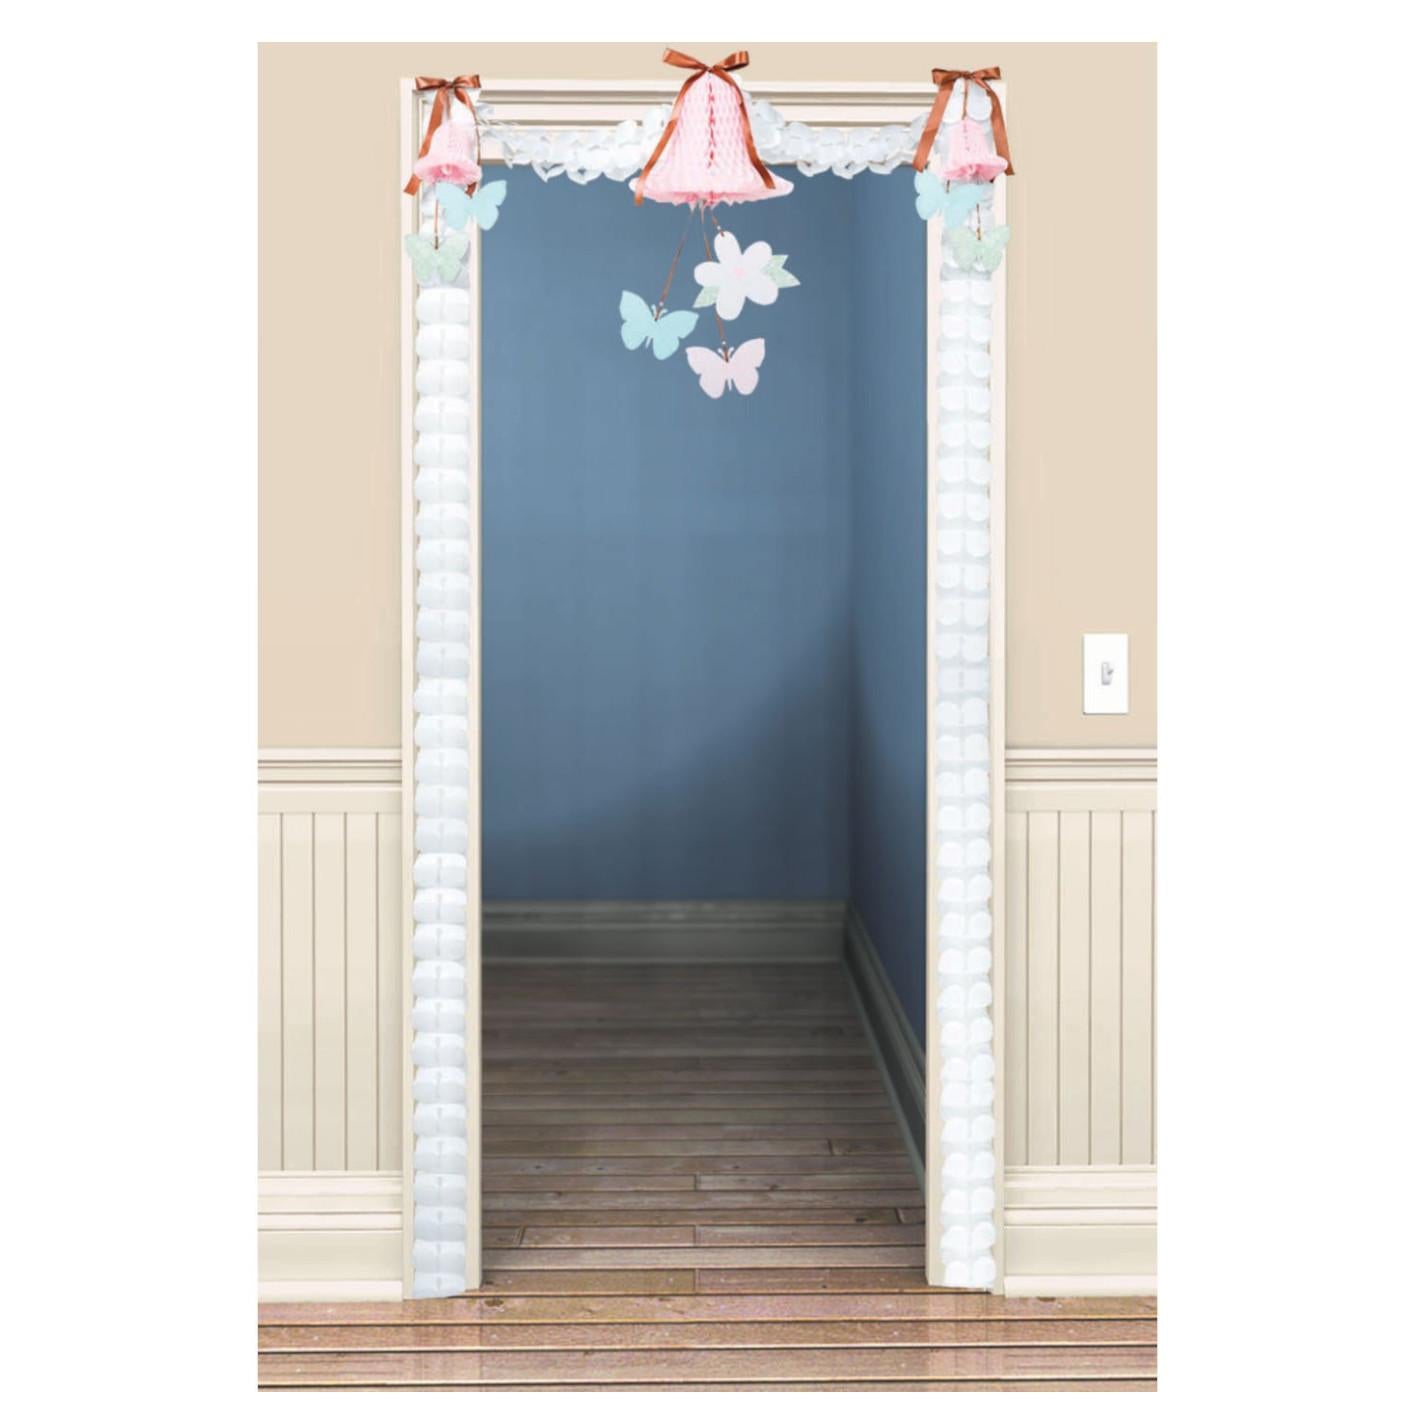 Blushing Bride Door Decorating Kit Decorations - Party Centre